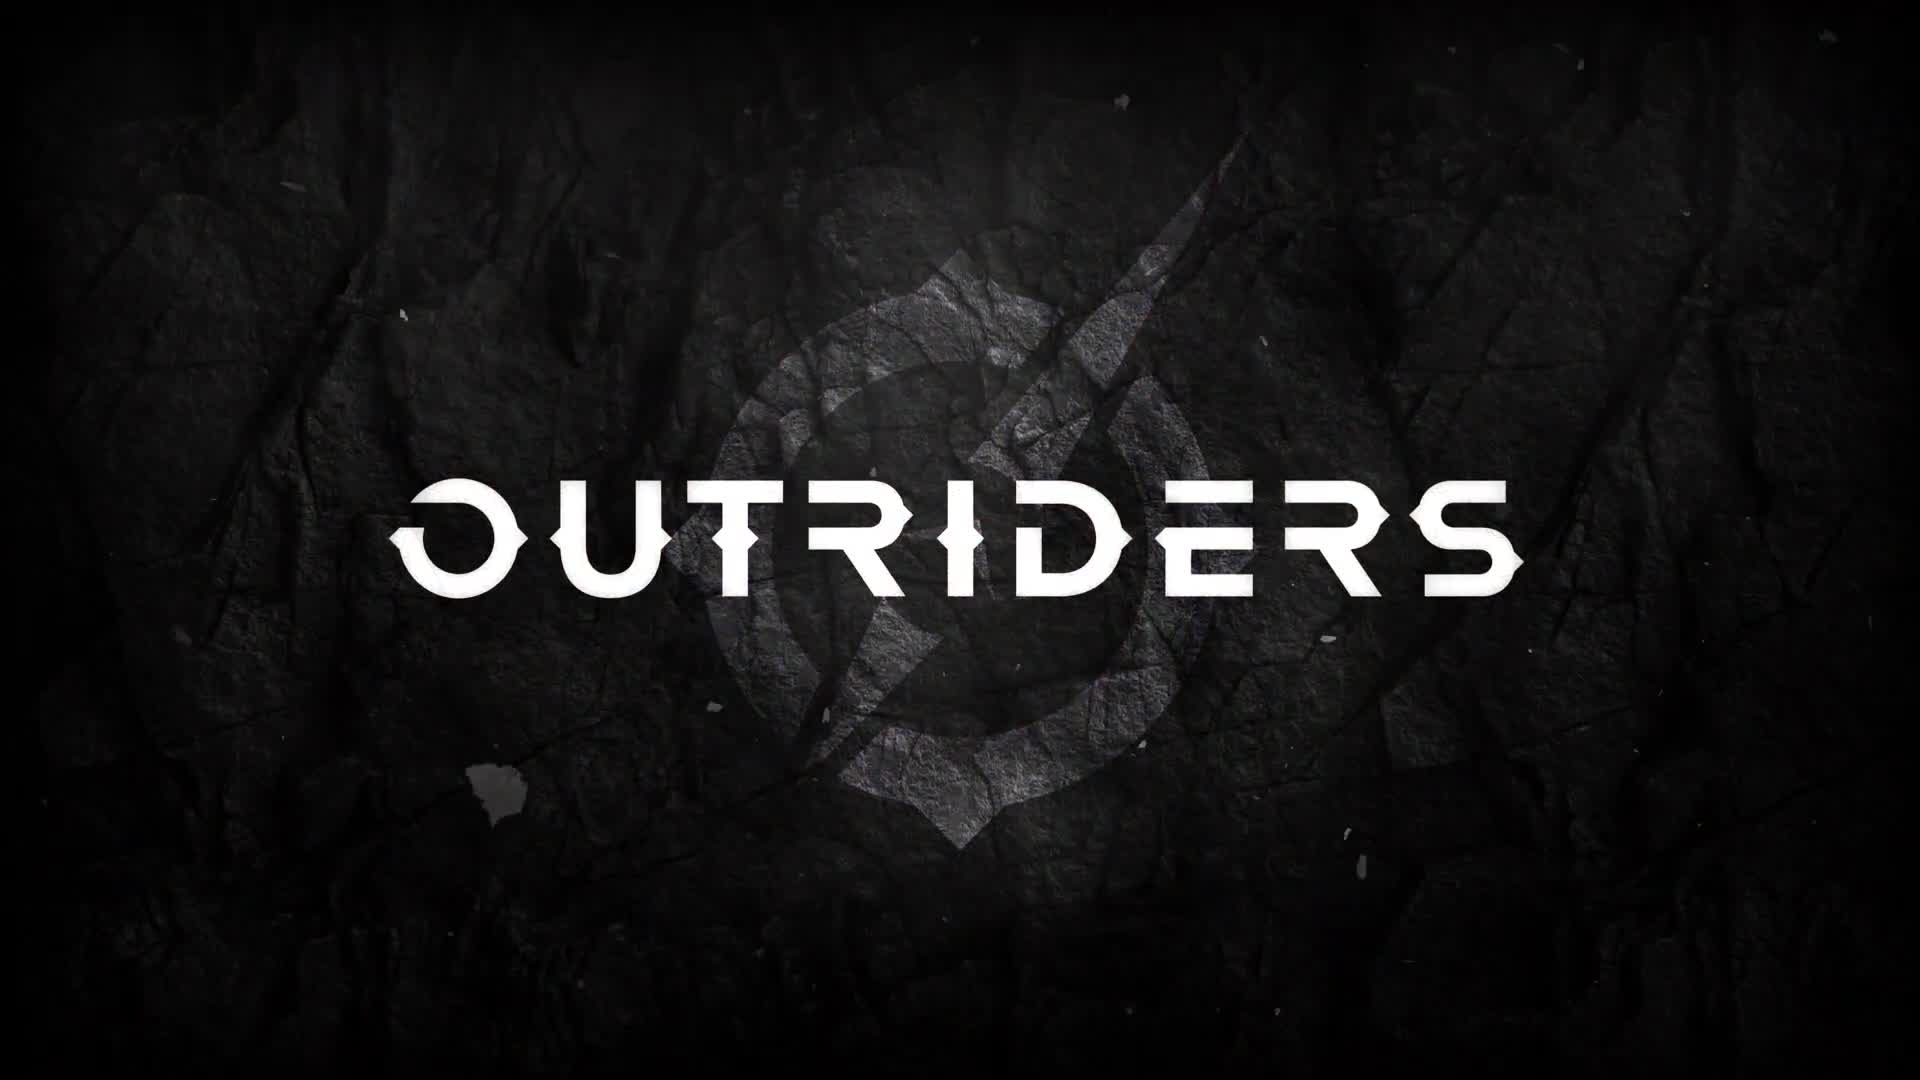 Outriders Wallpapers